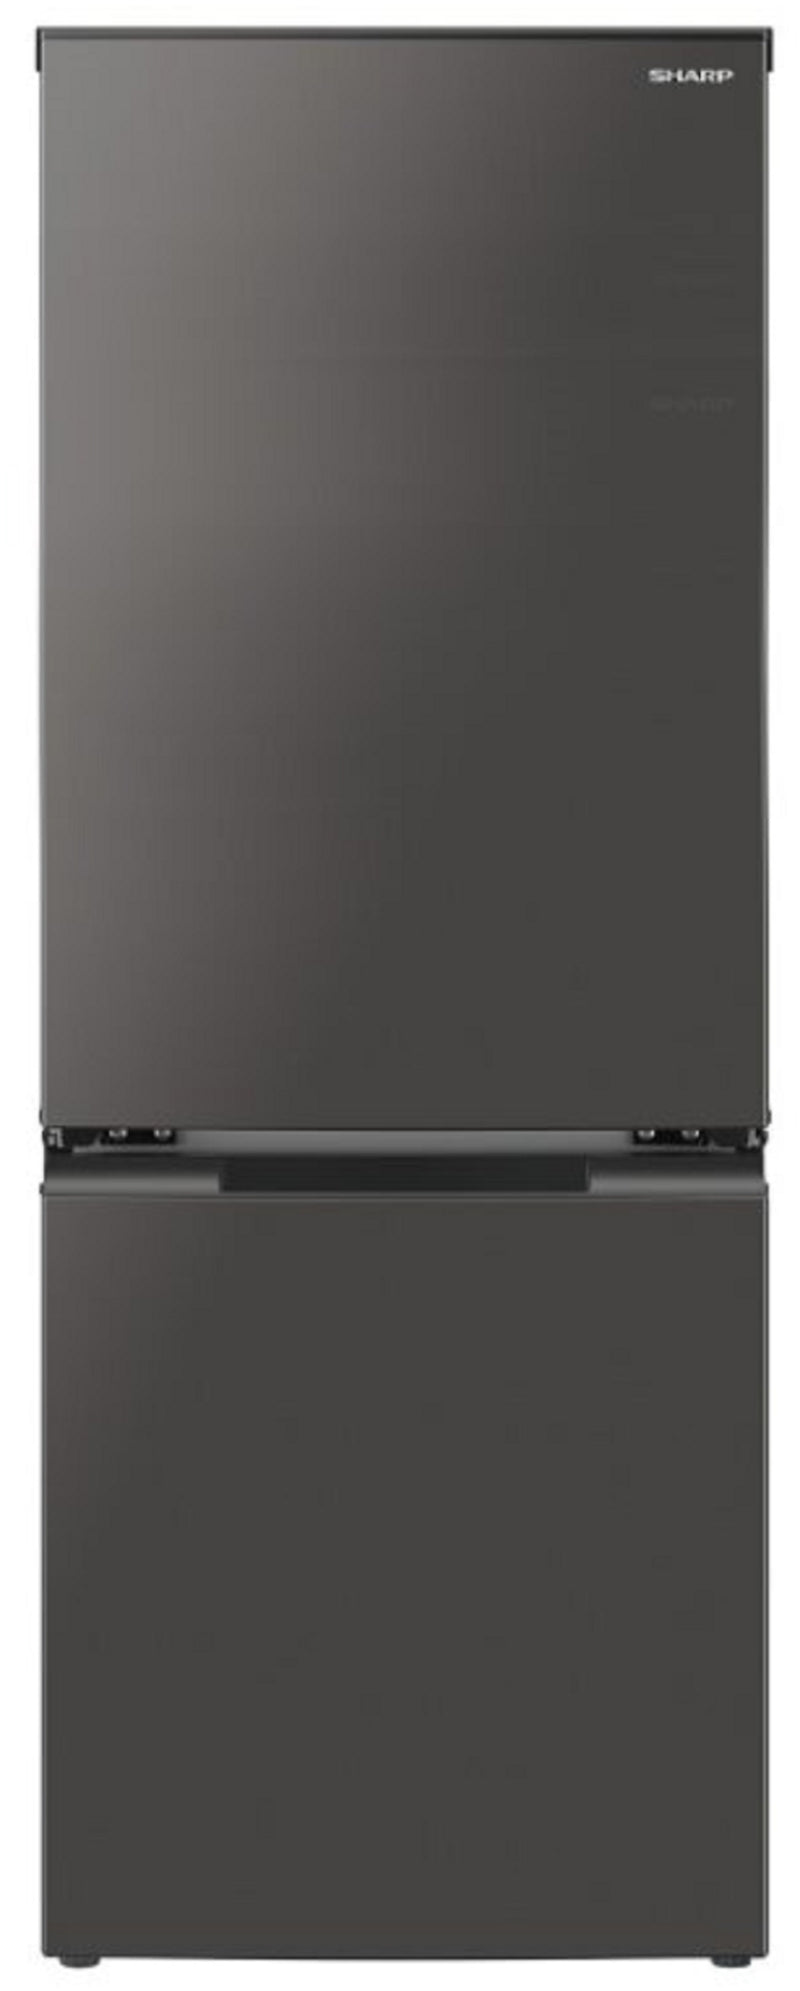 SHARP SJ-BR18J-G Fridge (Includes Unpacking And Moving Appliance Service)